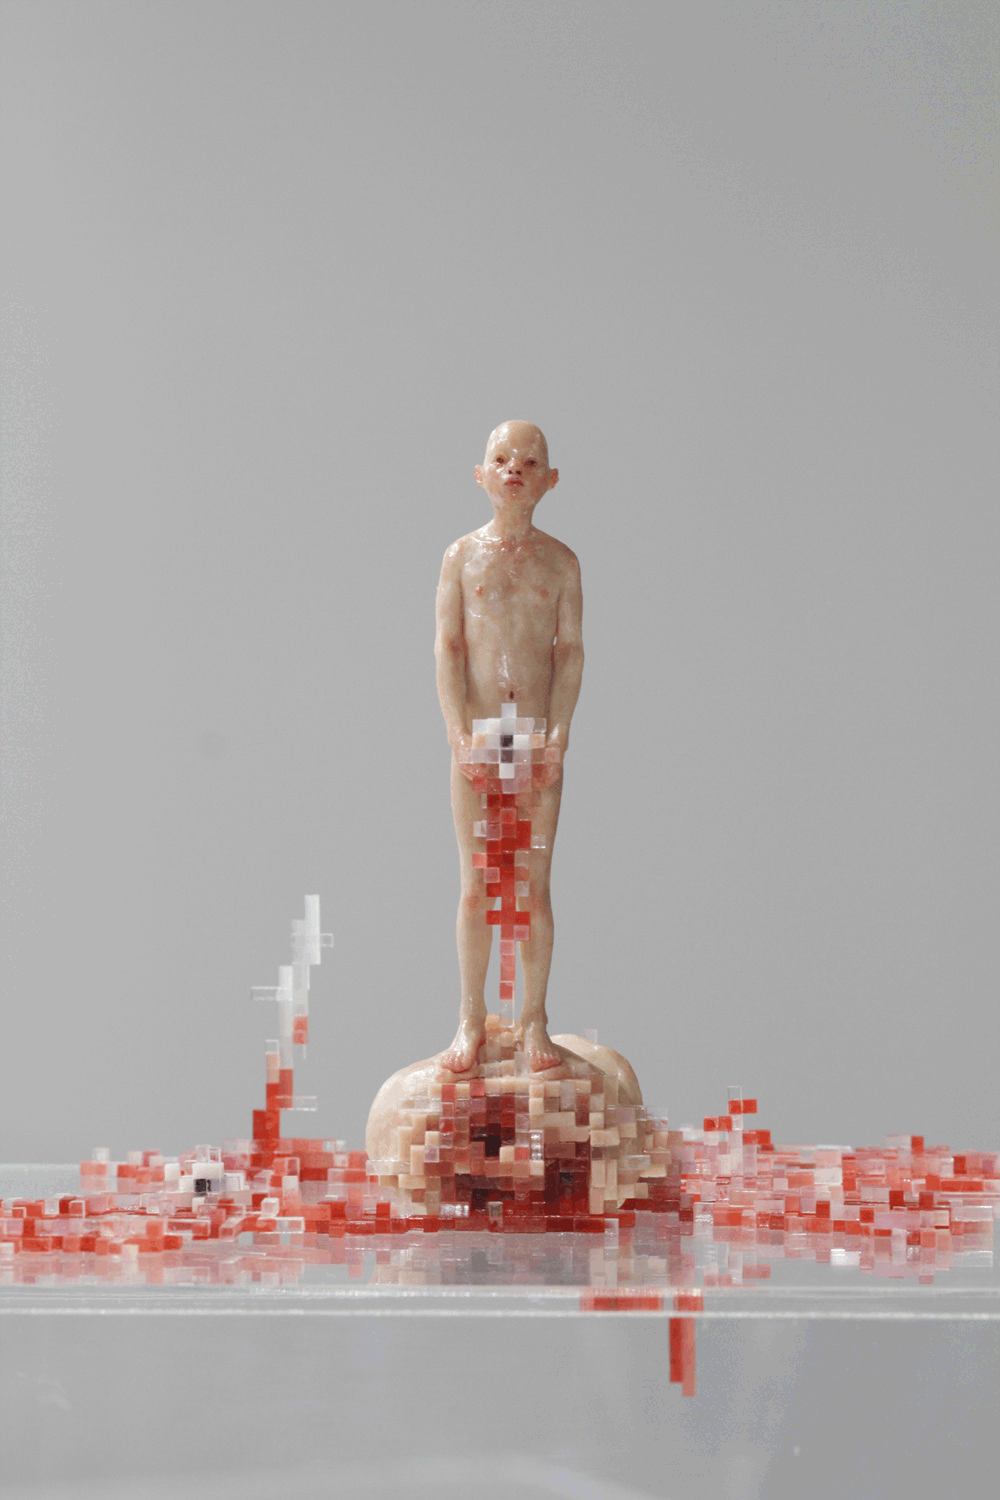 dongwook-lee-escultura-surreal-dionisio-arte (2)